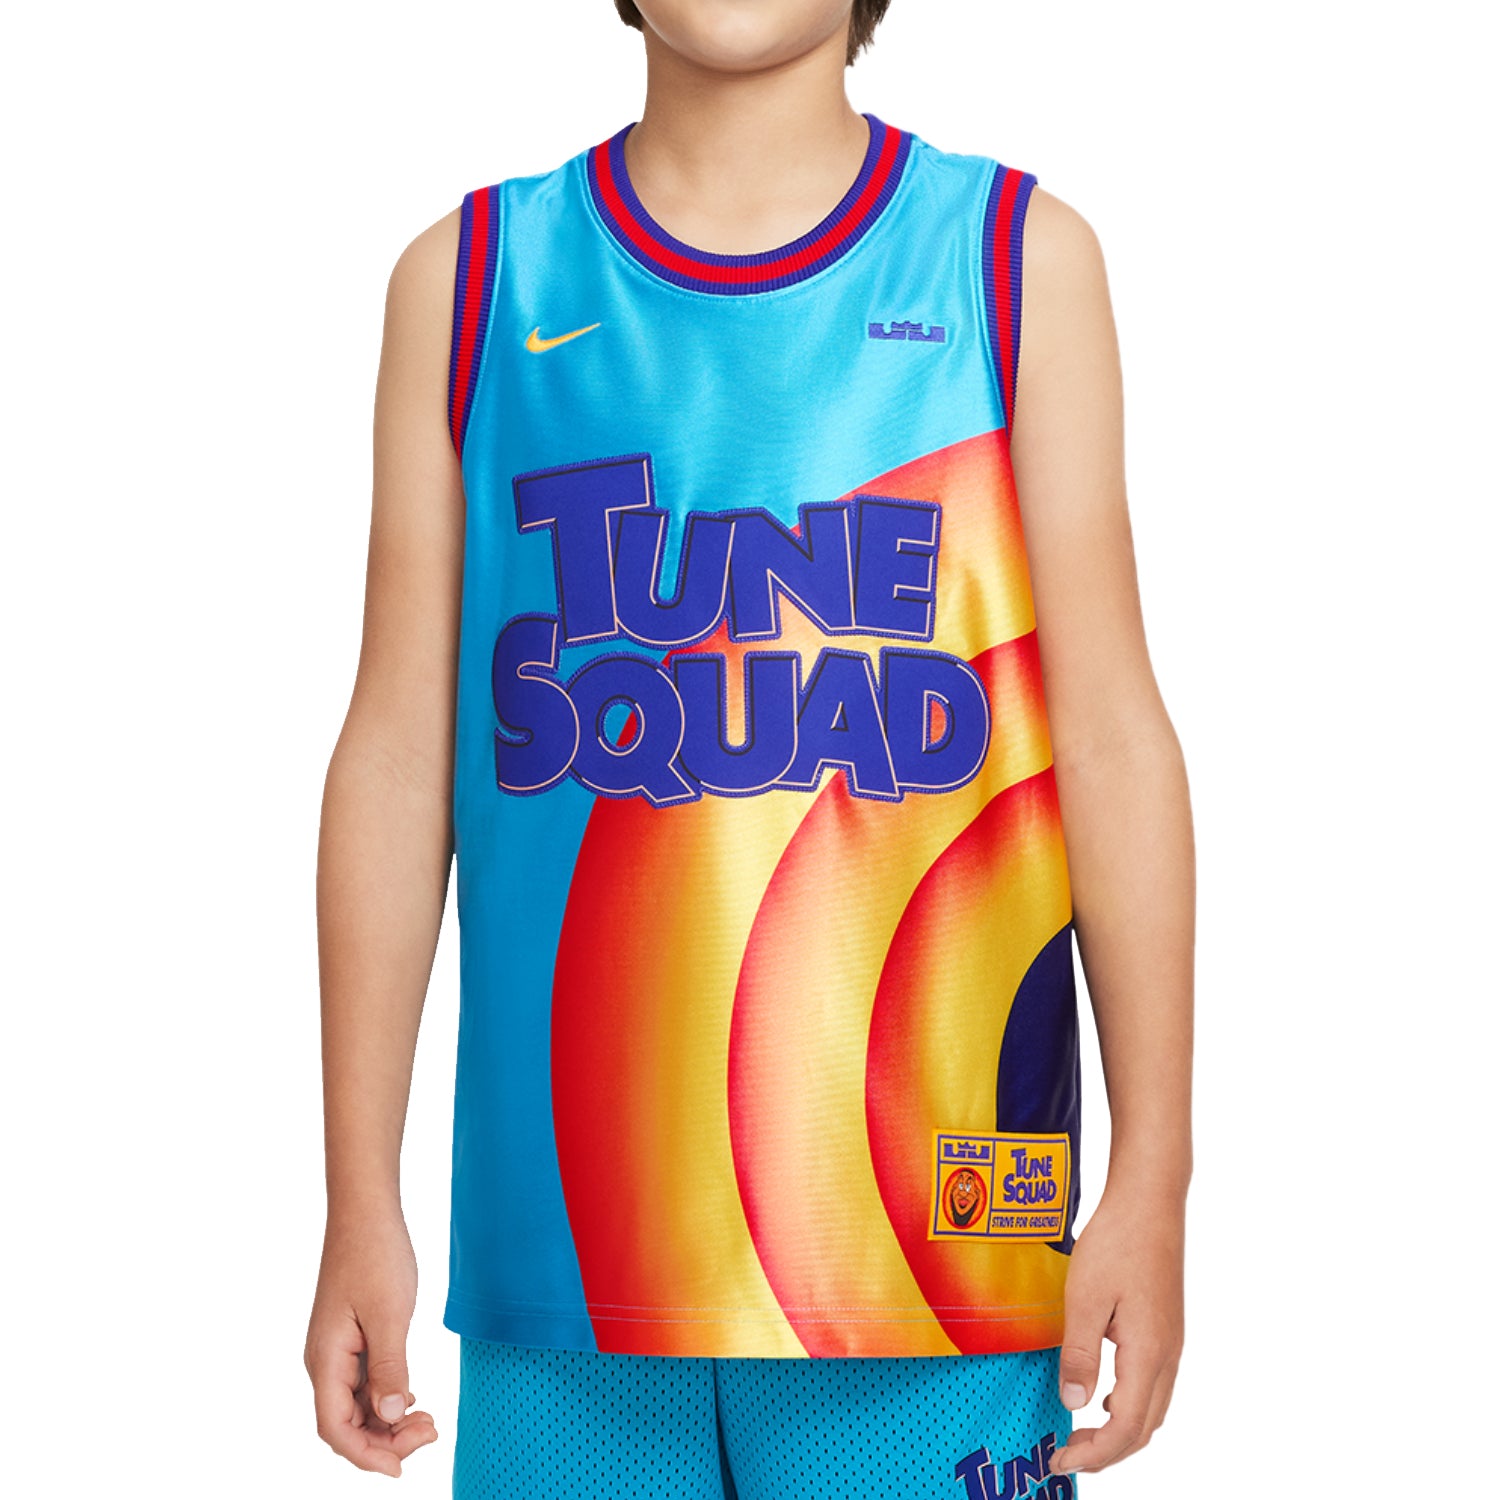 Nike Dri-fit Standard Issue X Space Jam: A New Legacy Basketball Top Big Kids Style : Dm2973